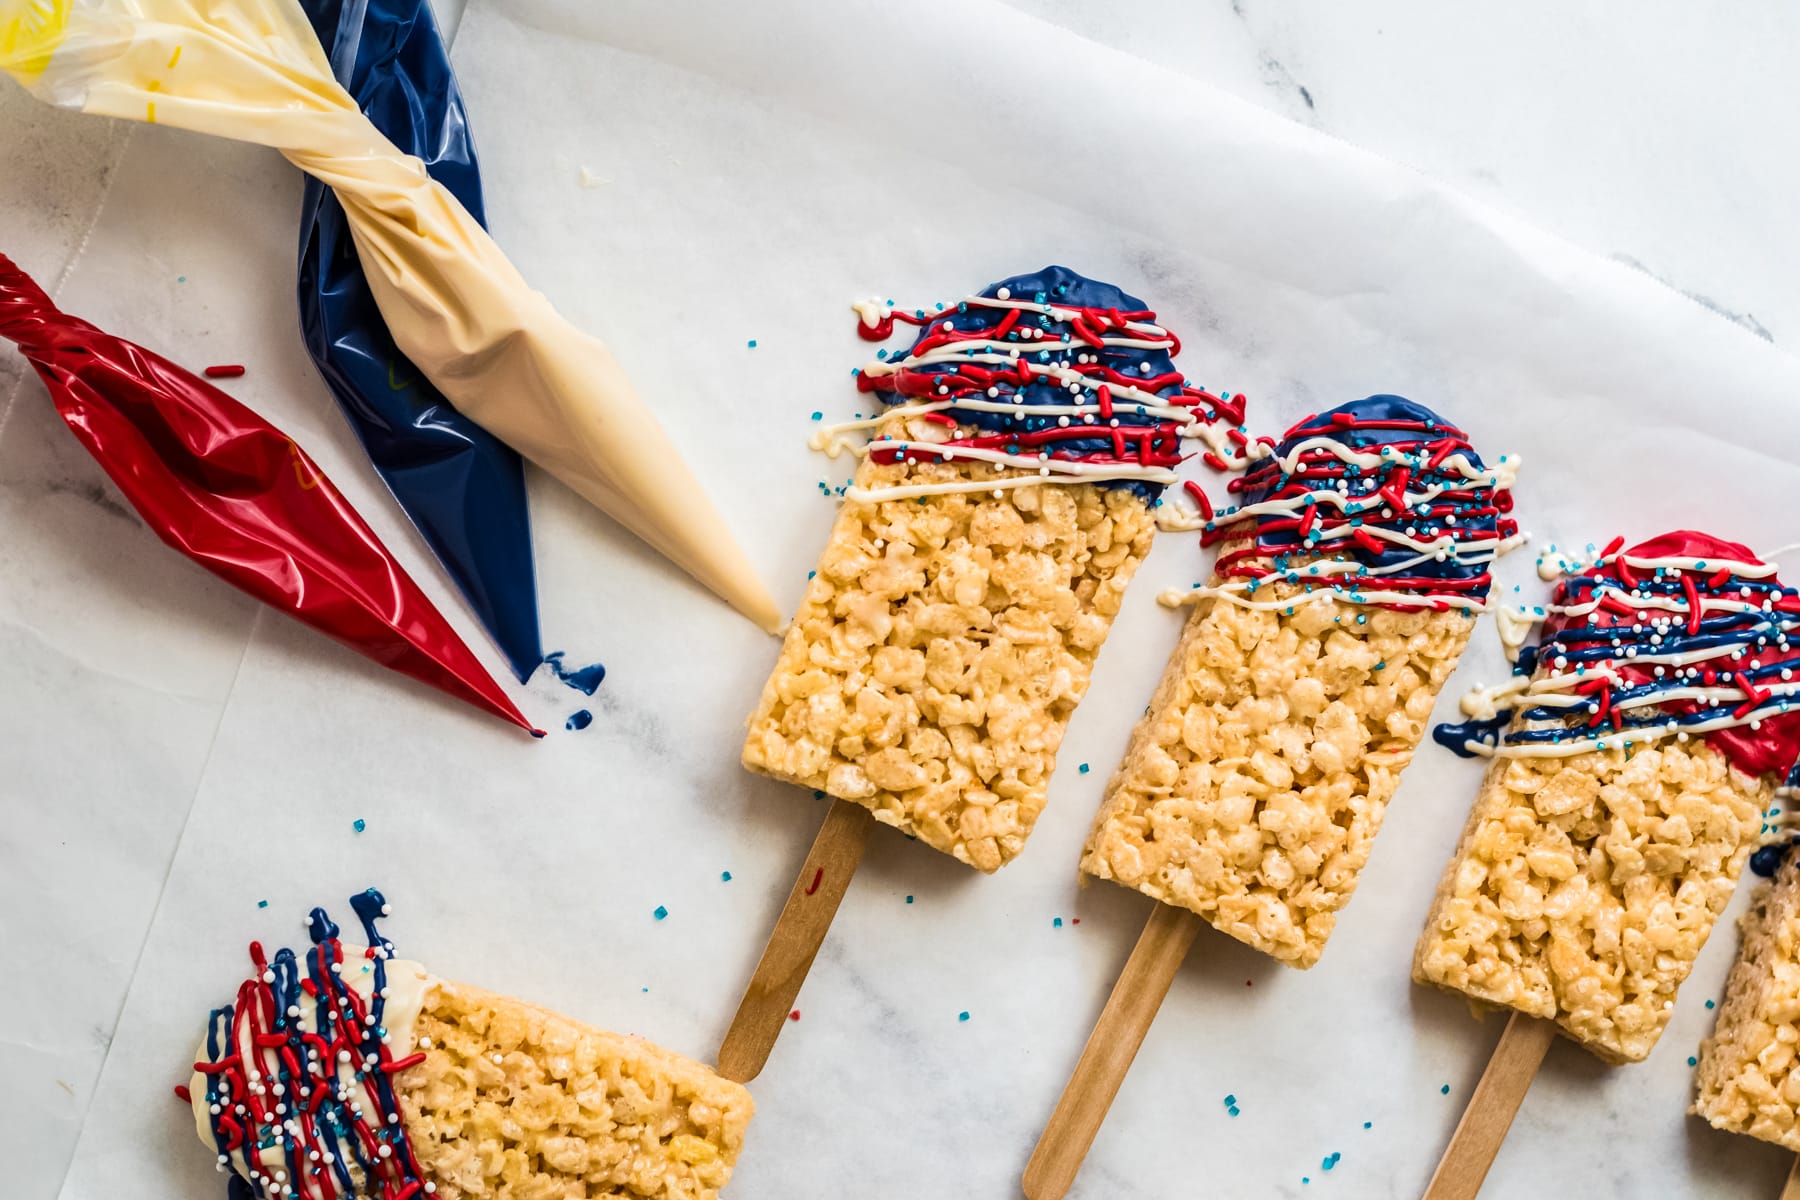 Rice krispie treats cut into popsicle shapes and drizzled with red, white and blue chocolate.